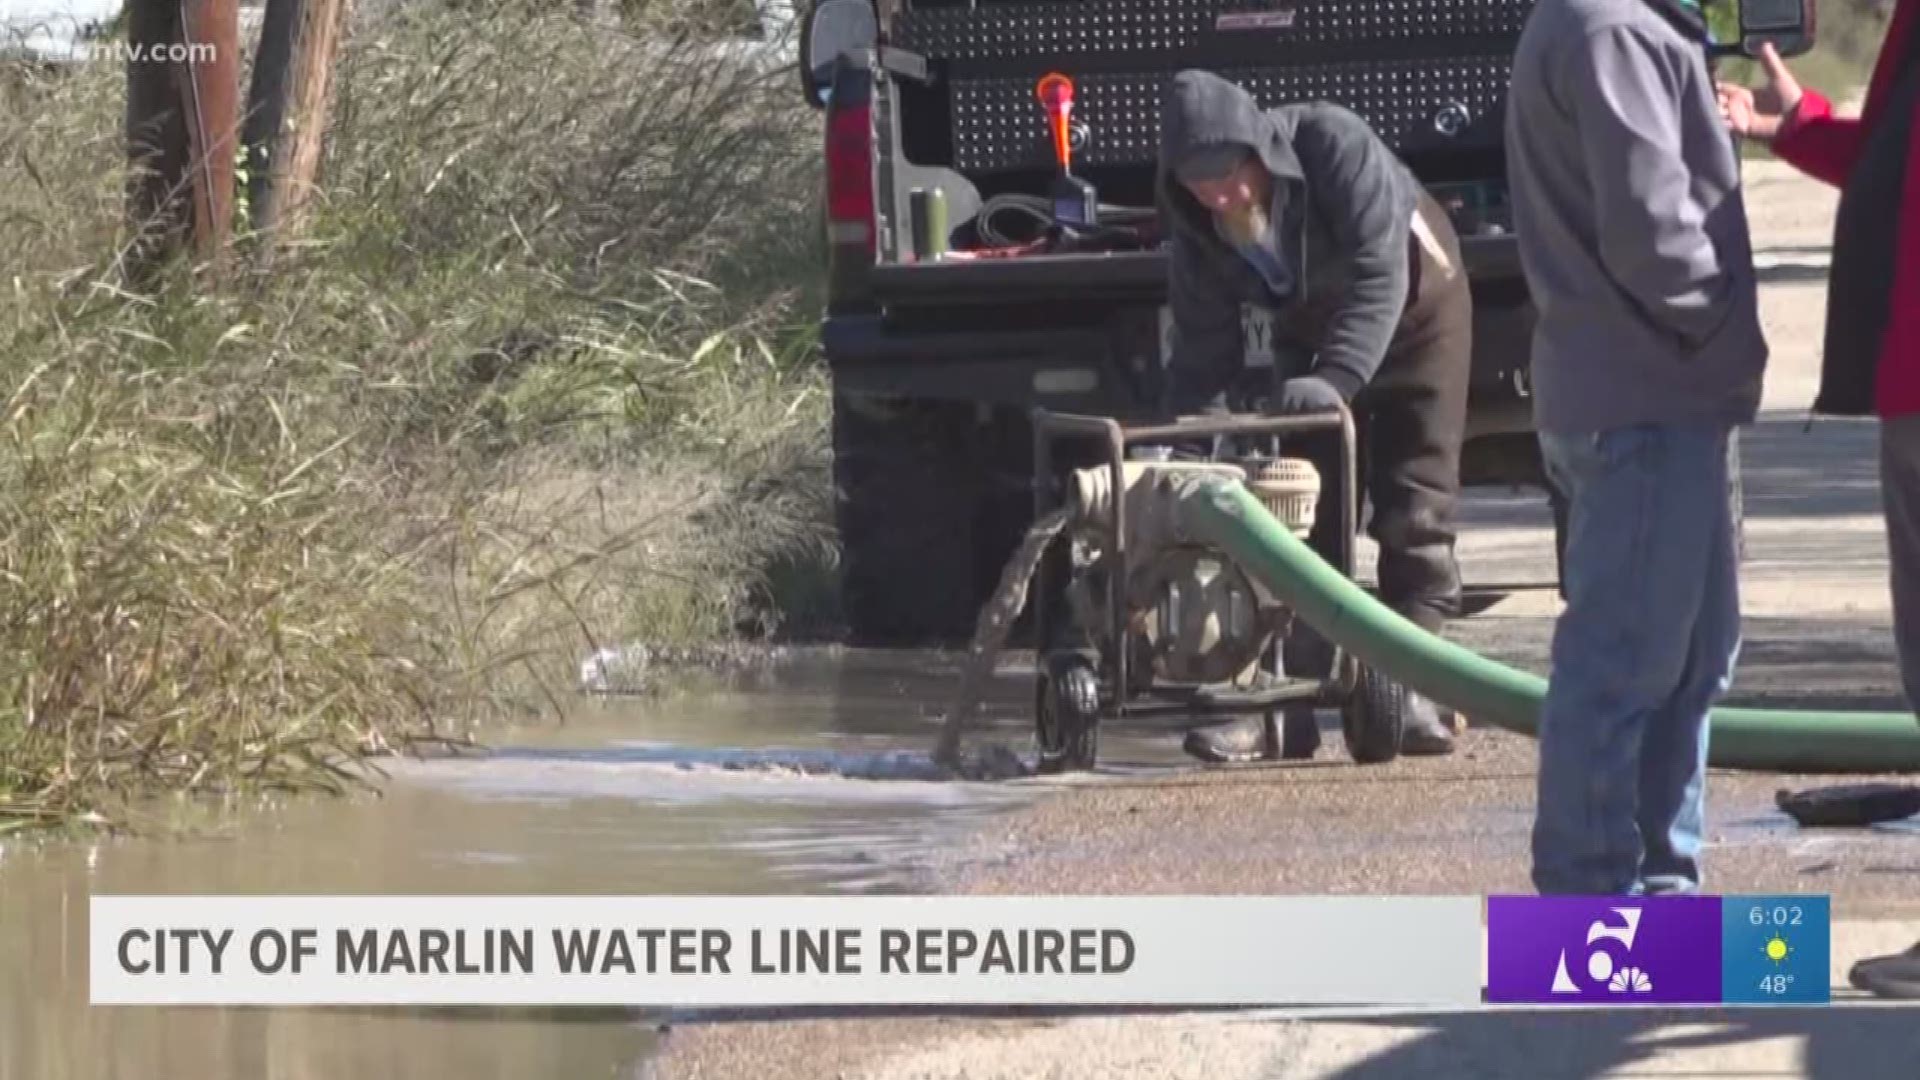 City of Marlin water line repaired